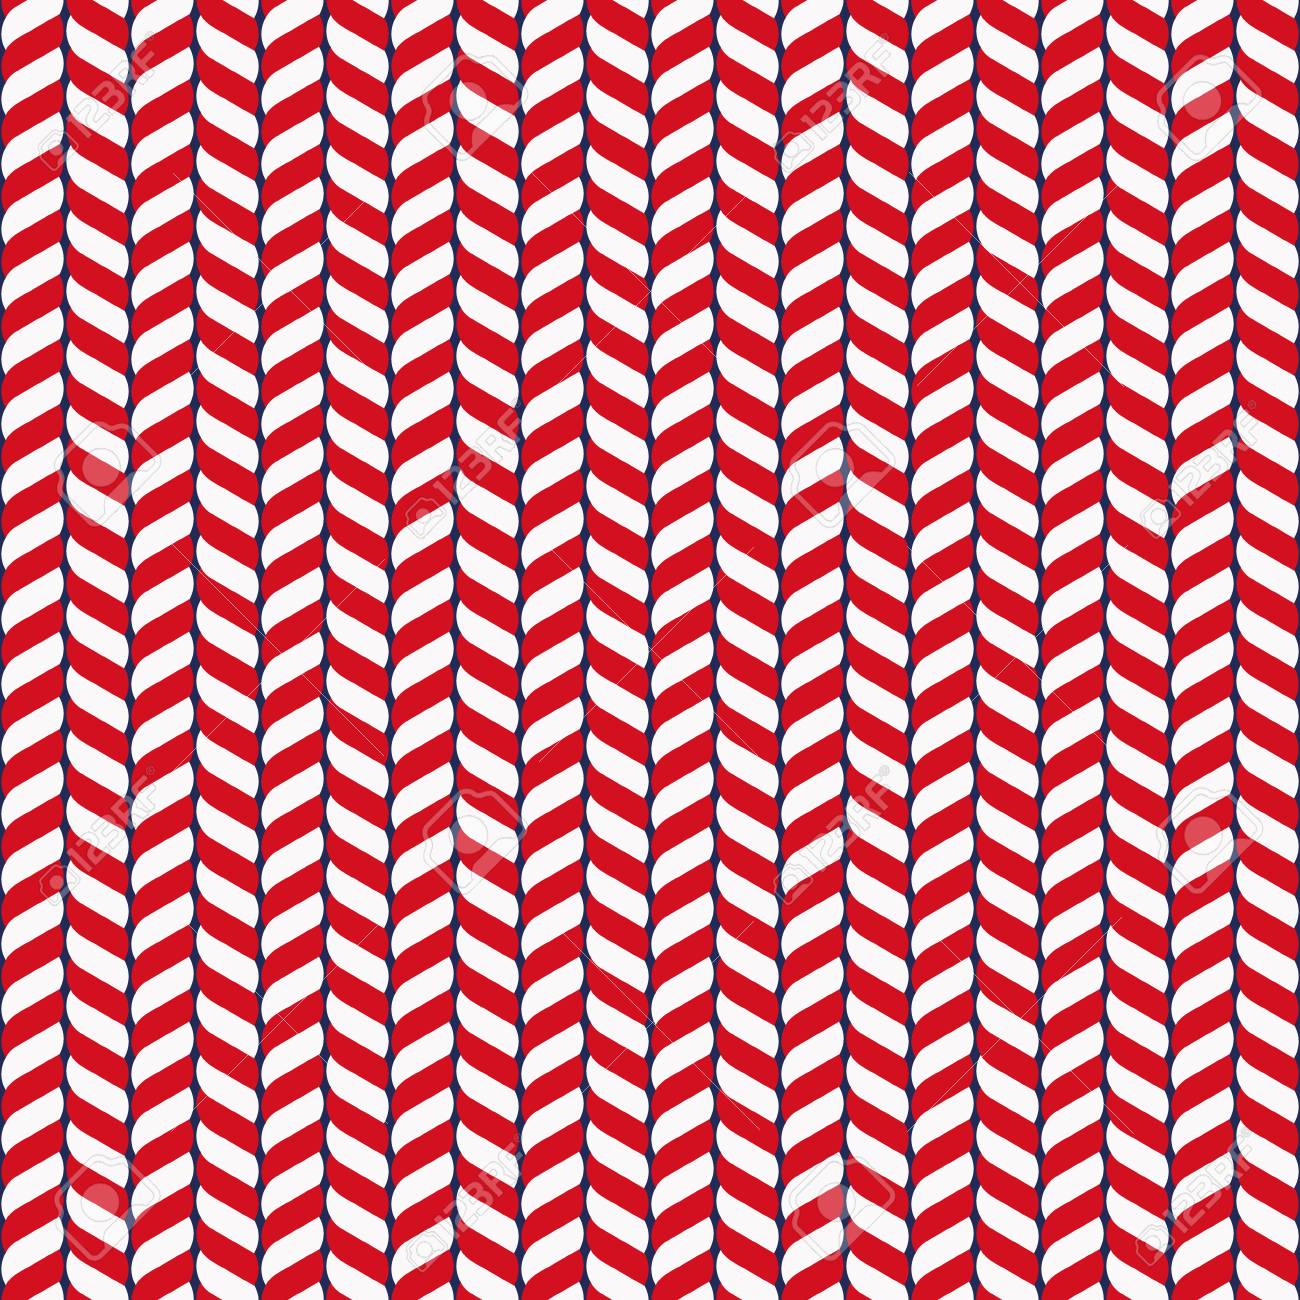 Candy Canes Vector Background Seamless Candy Cane Stripes Great